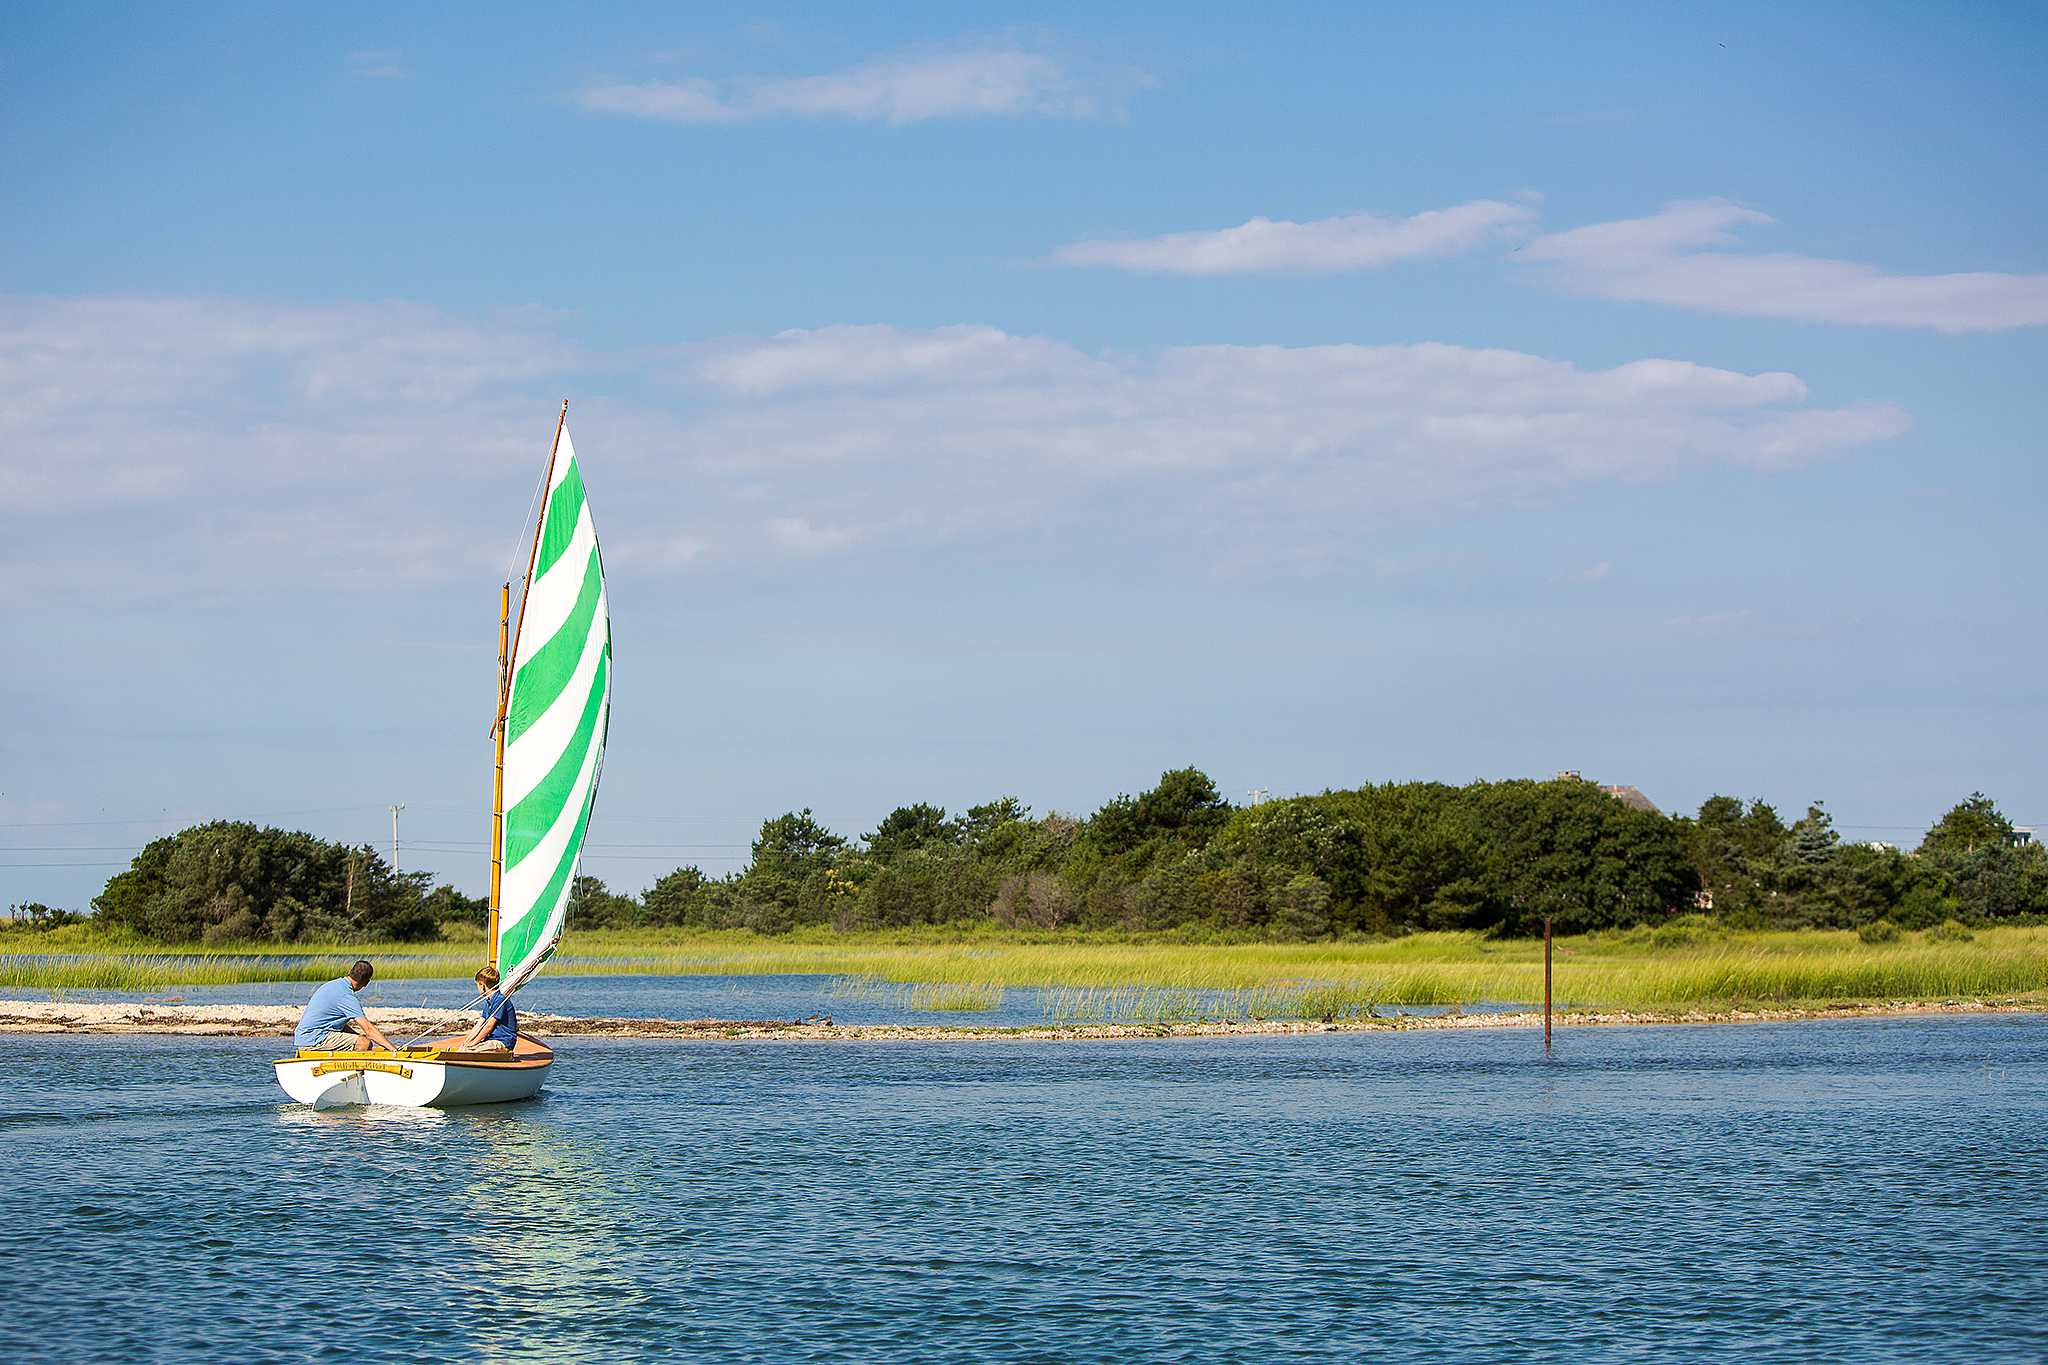 Father and son sailing in shallow water with sea grass